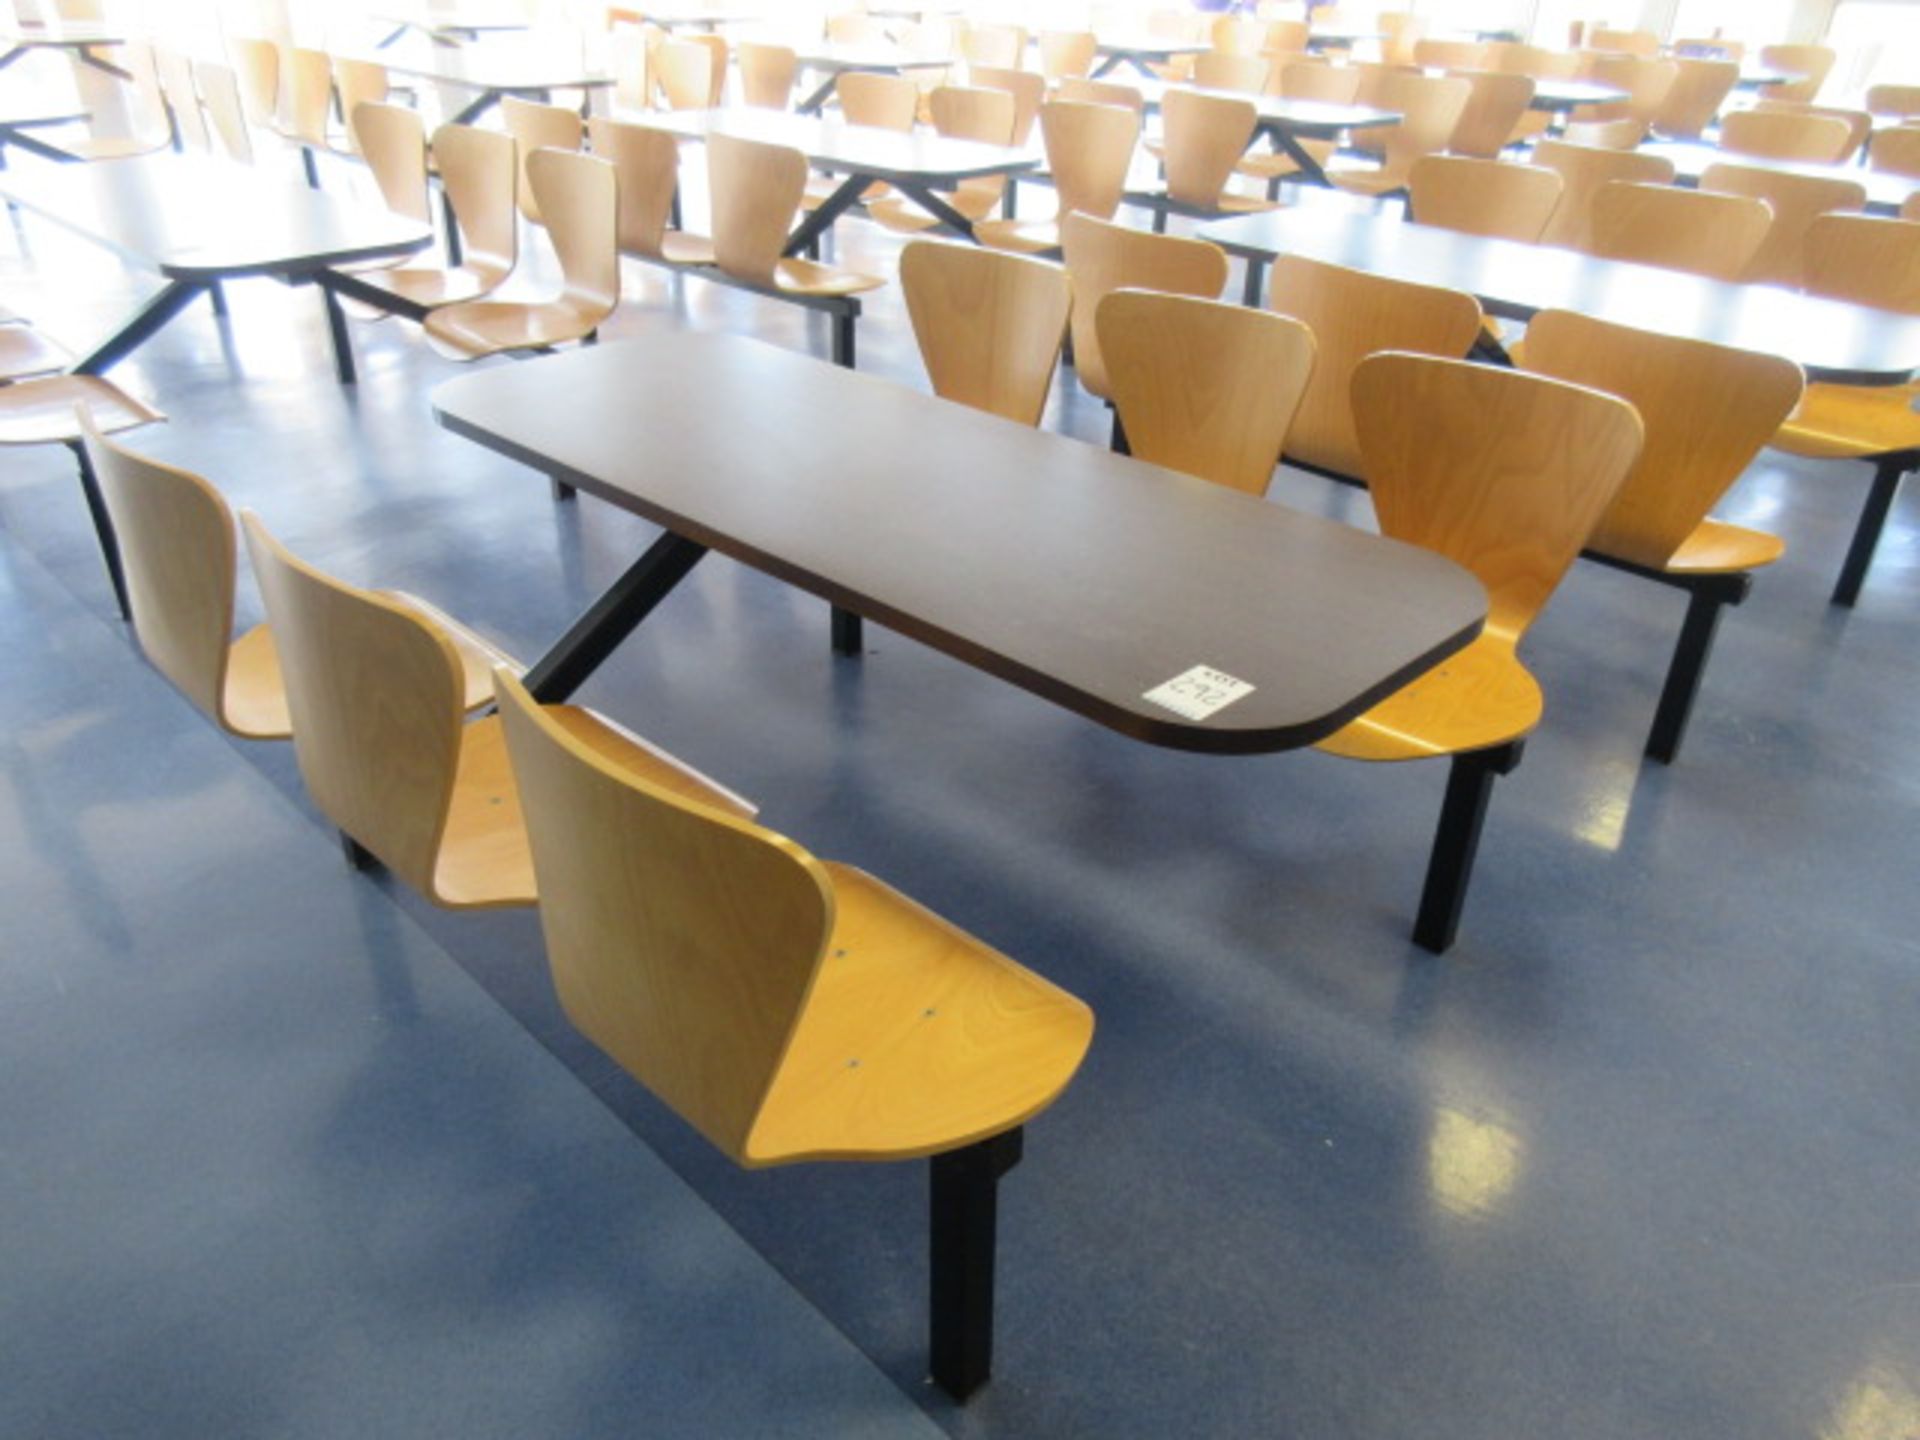 FIVE SIX SEATER CANTEEN COMBINED TABLE & CHAIR UNITS - Image 2 of 3